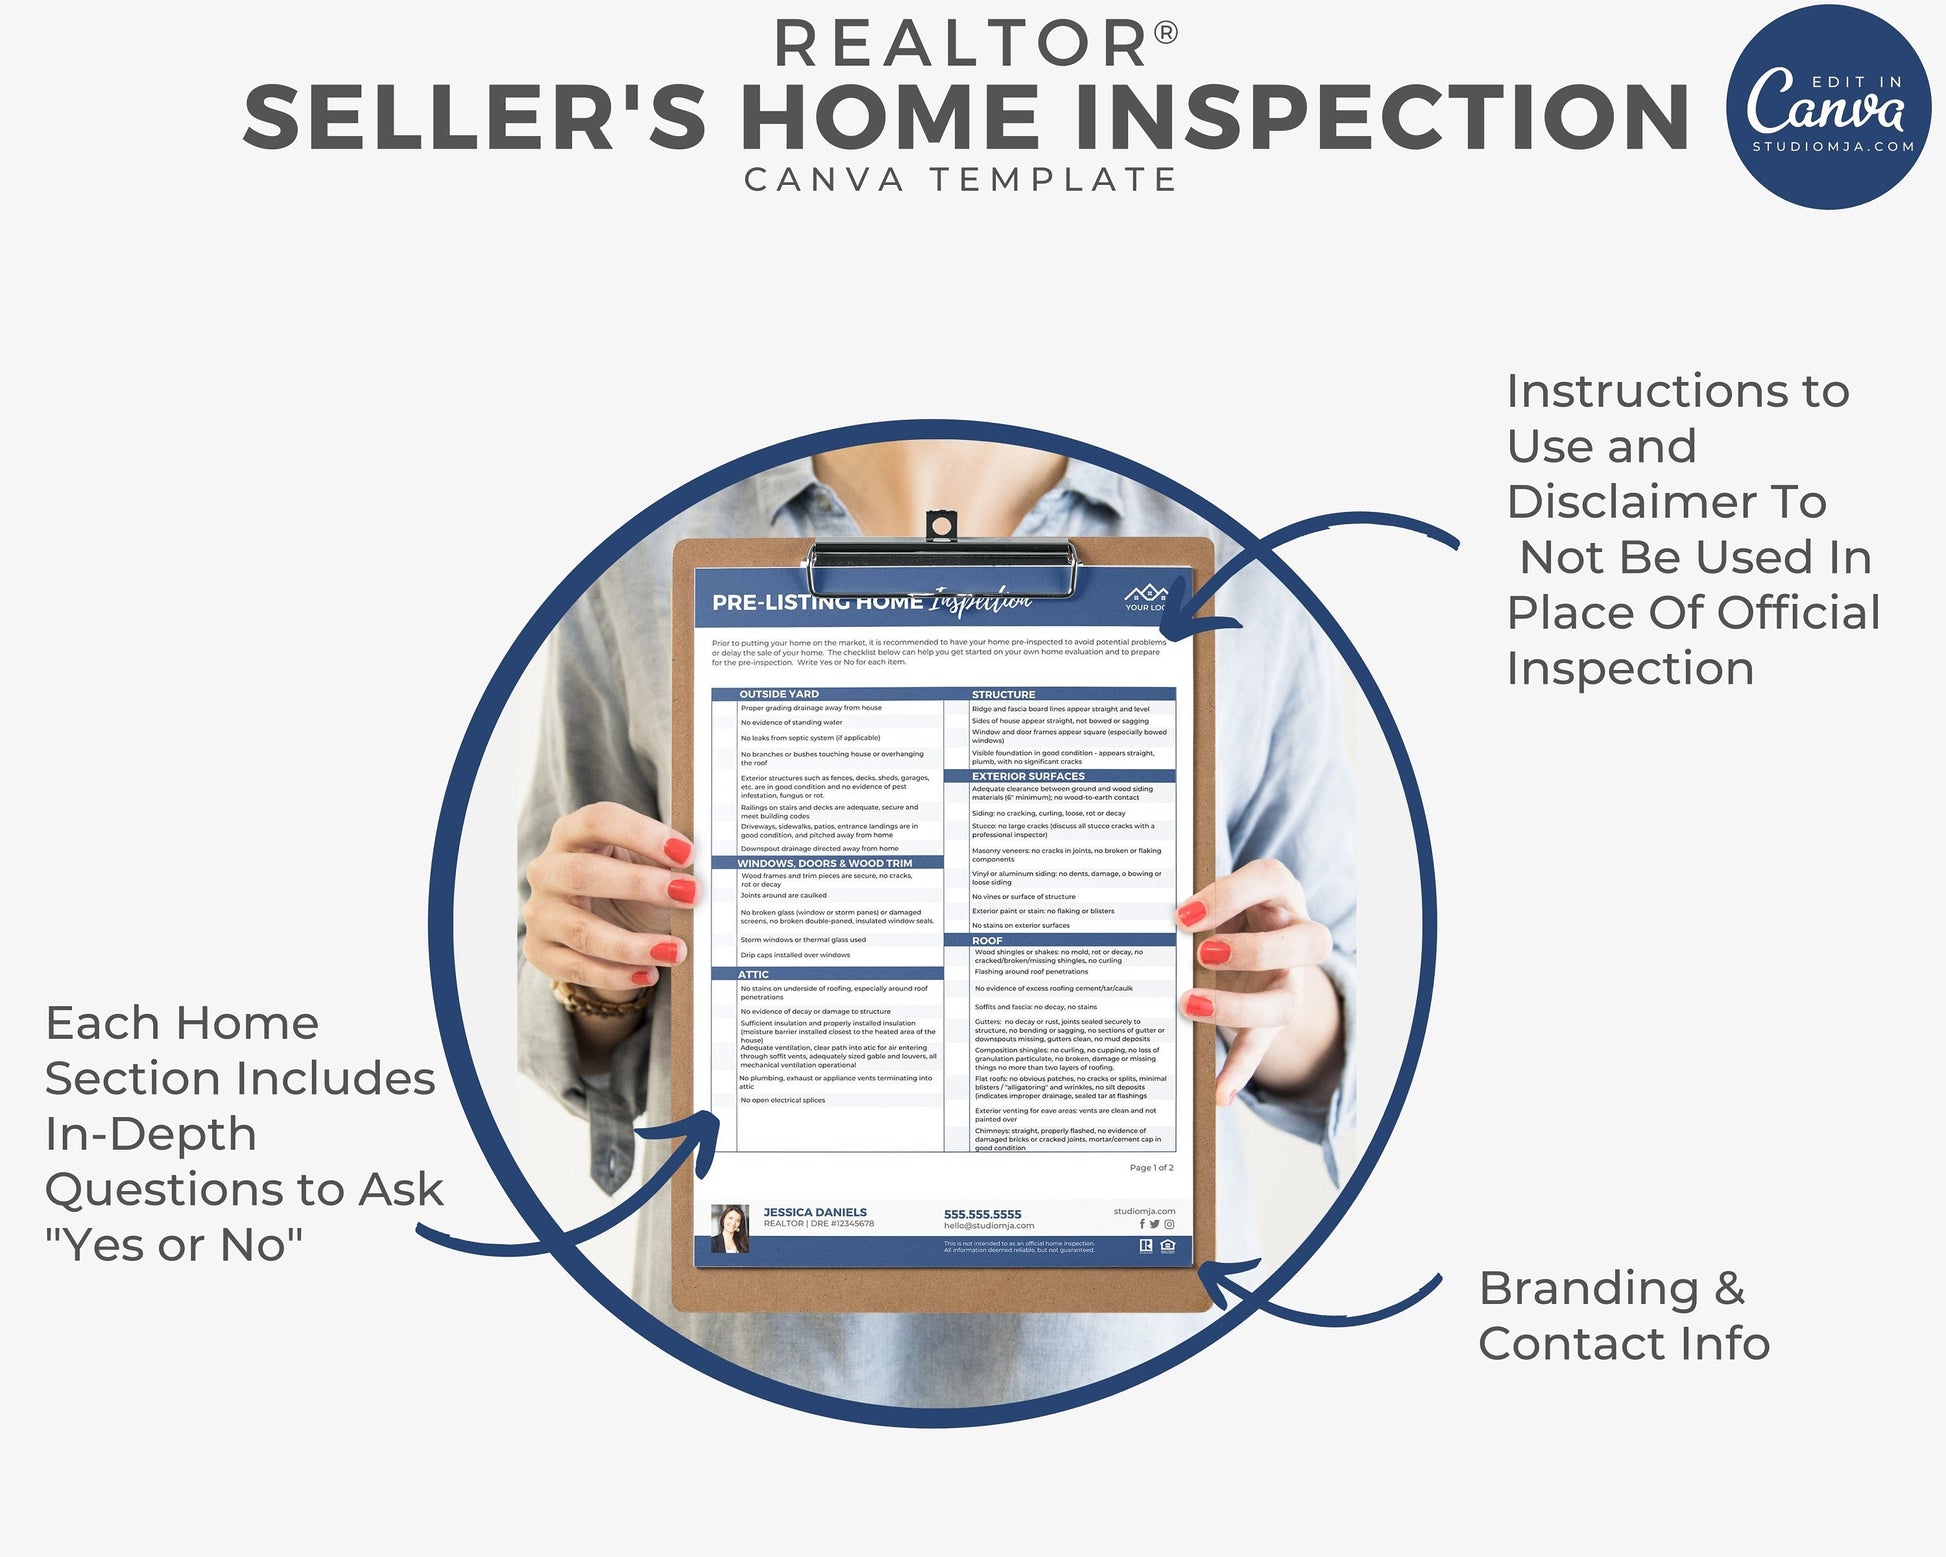 Real Estate Home Inspection Checklist, Real Estate Marketing, Printable Checklist, Real Estate Seller's Guide, Canva Template, Logo